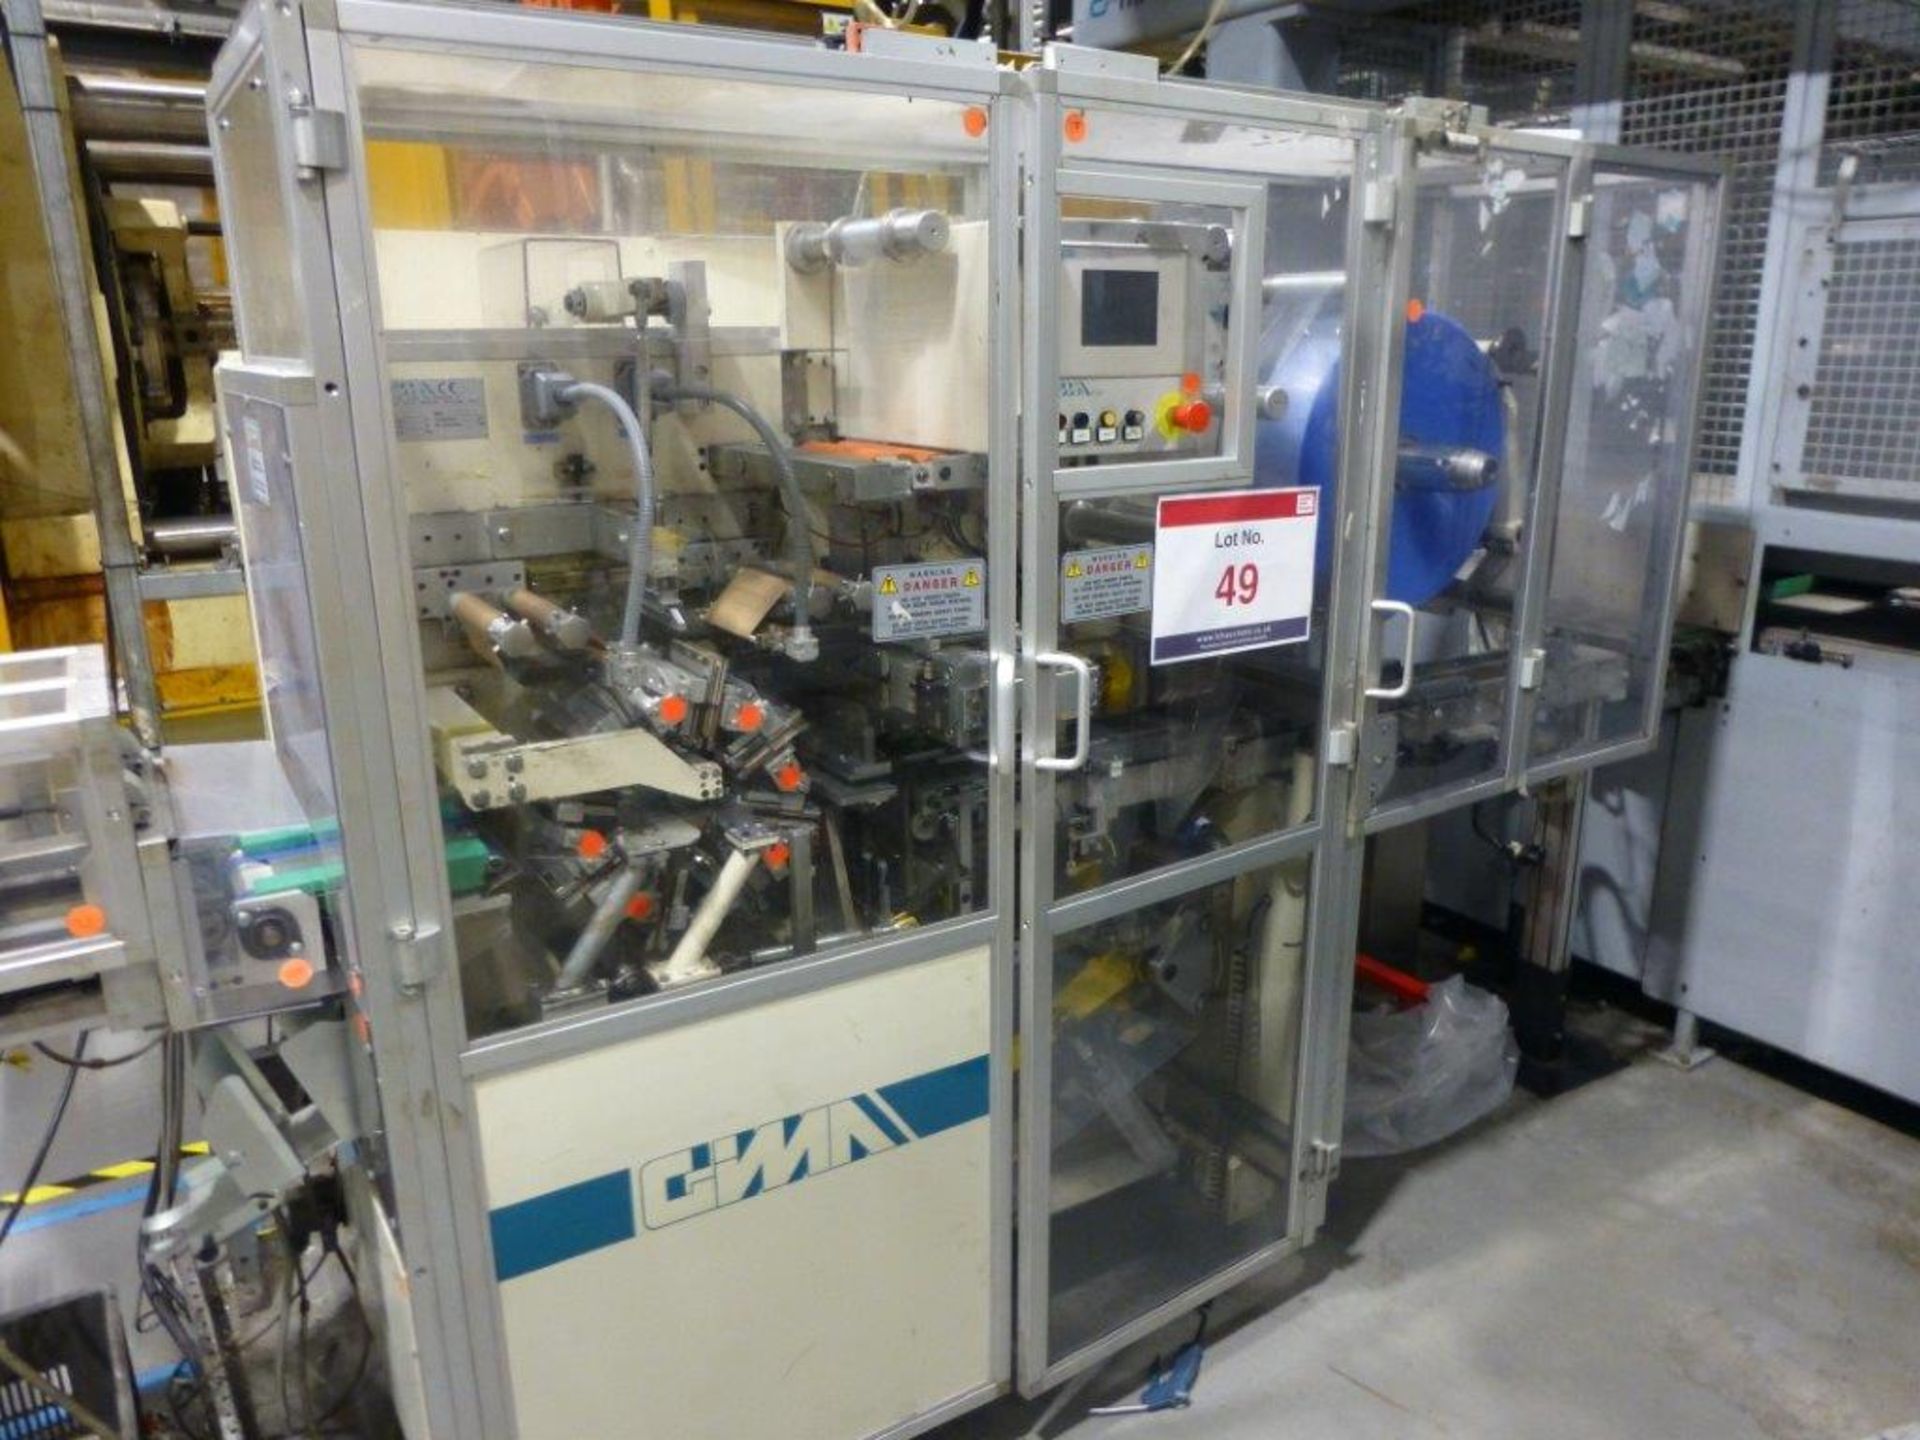 GIMA Type 884 DVD CNC Rotary Thermal Welding Machine Serial No. 88434E0 (2003). Please note: A